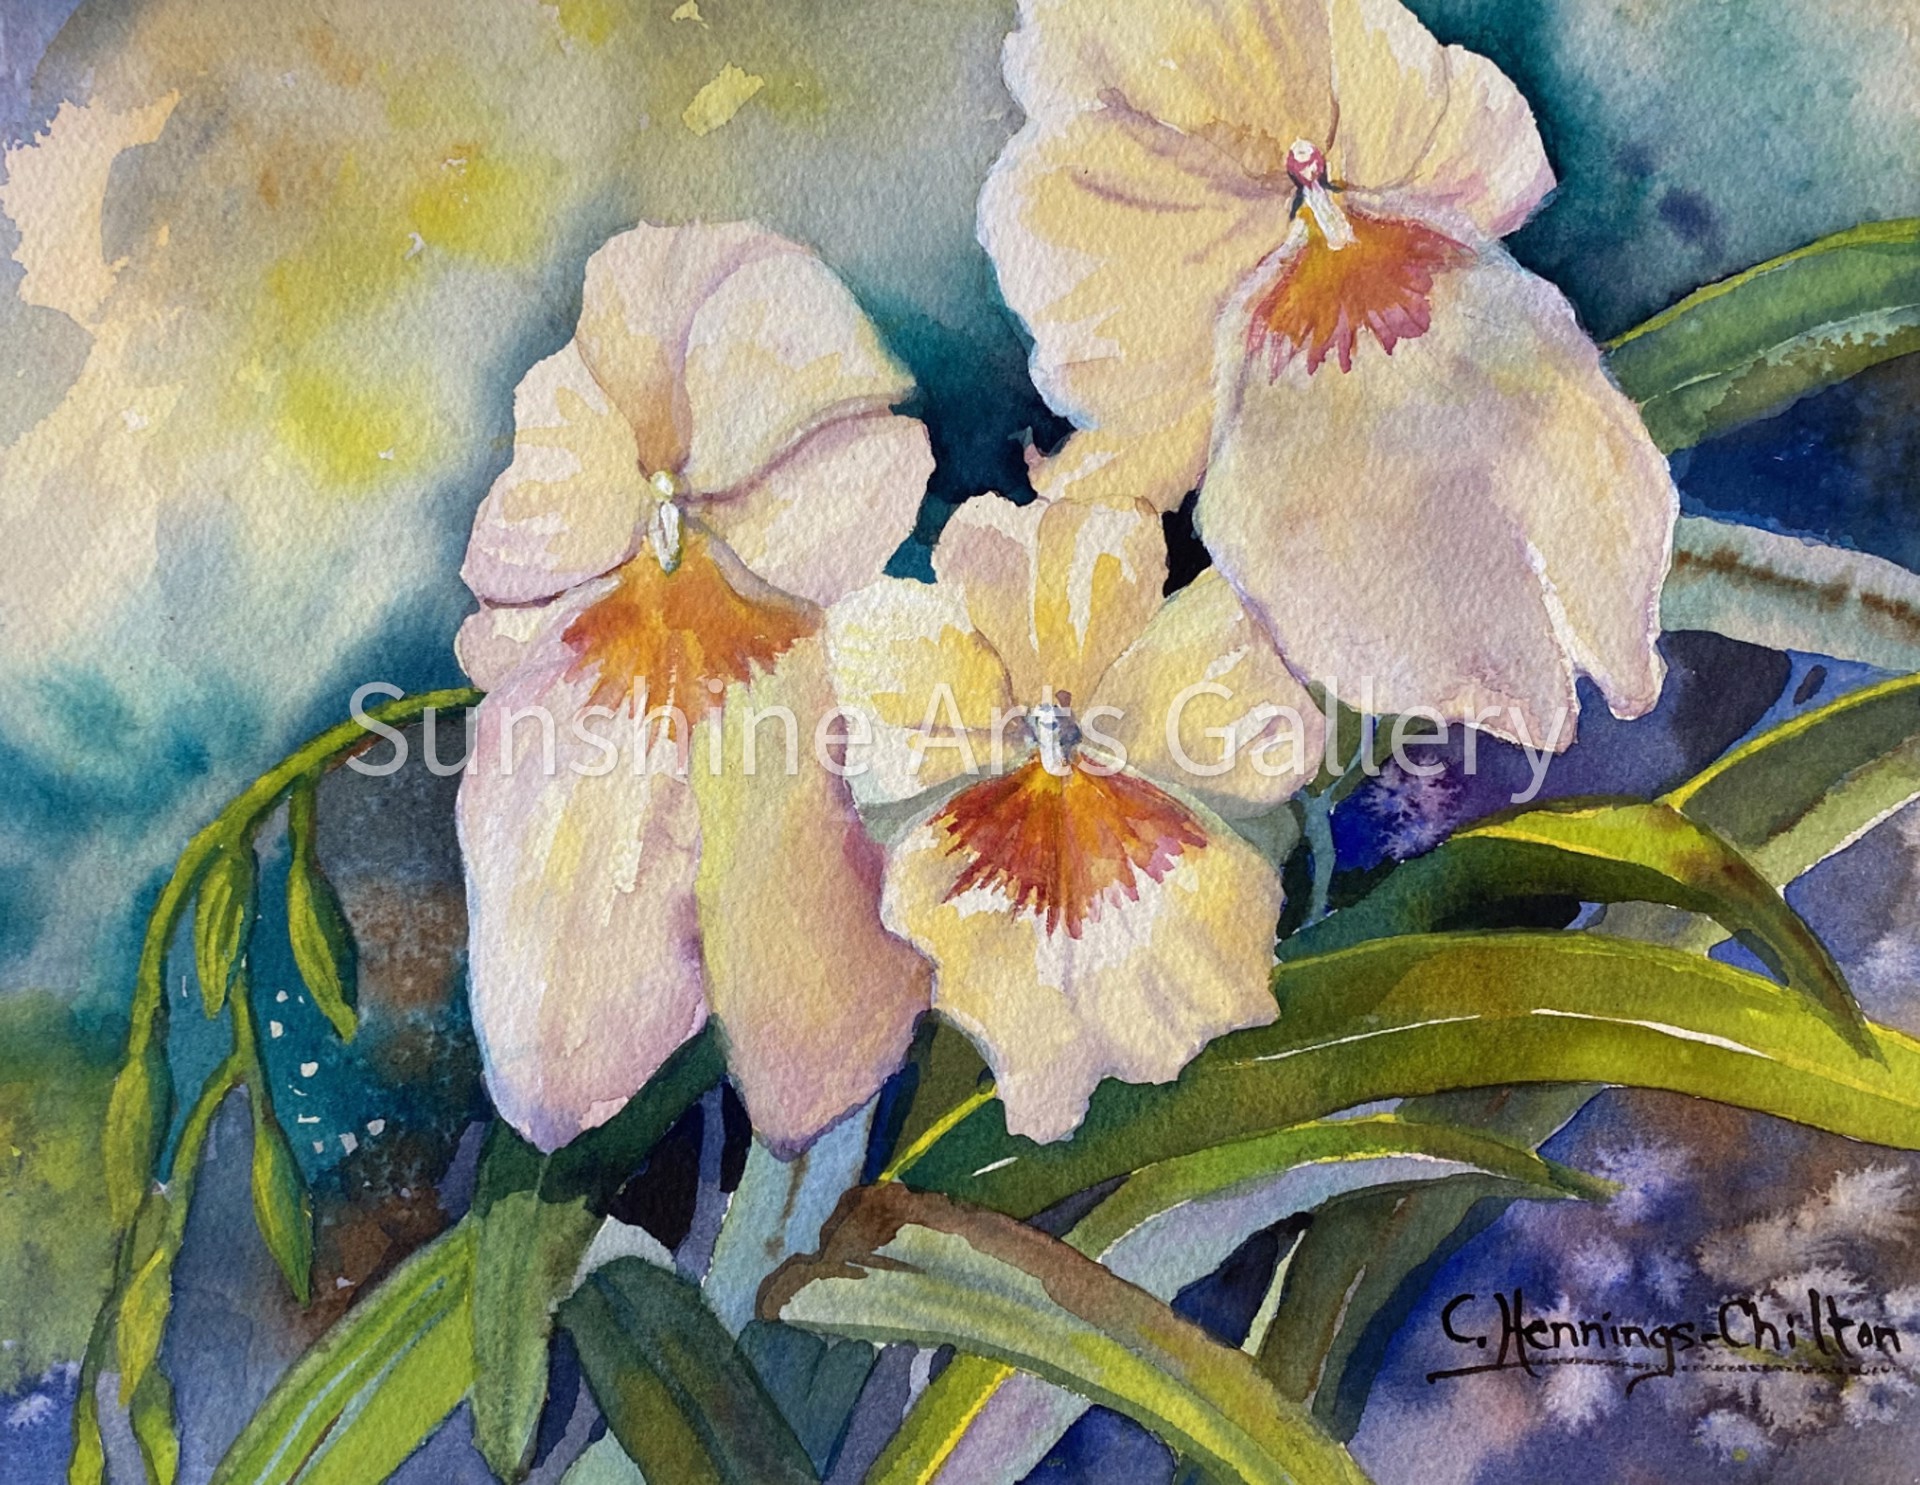 Miltonia Orchid by Connie Hennings-Chilton